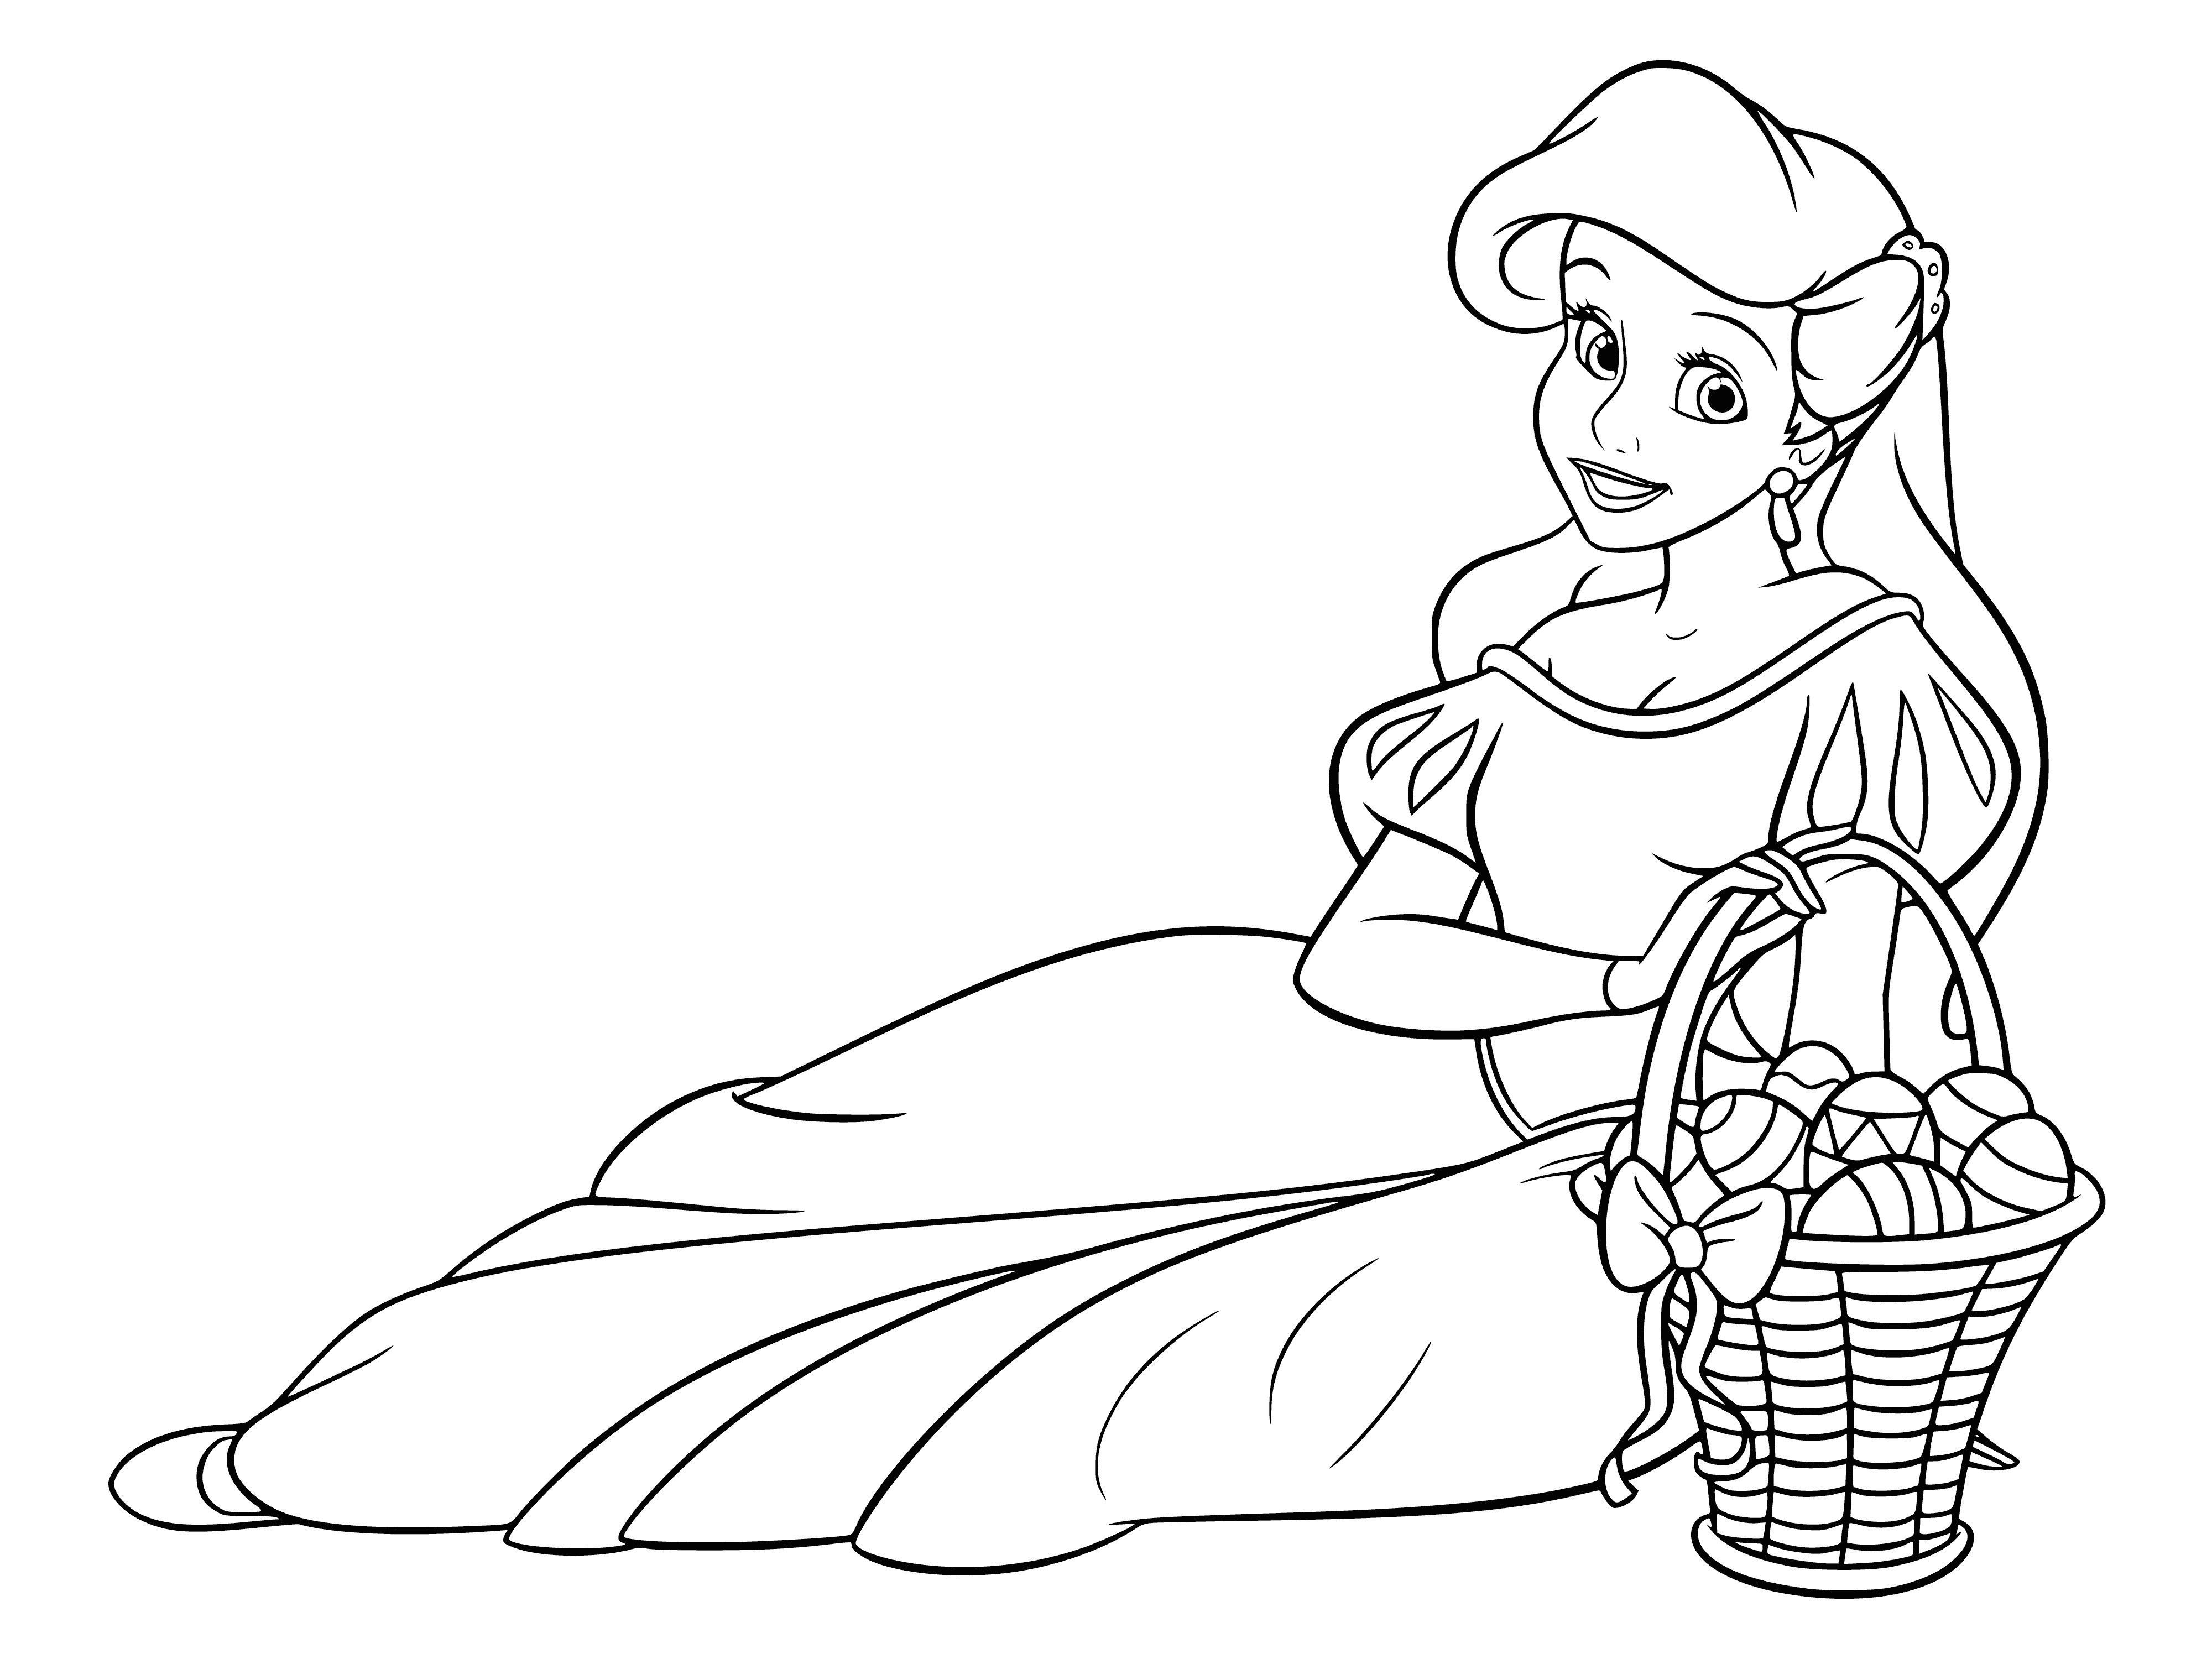 Ariel with a basket of Easter eggs coloring page